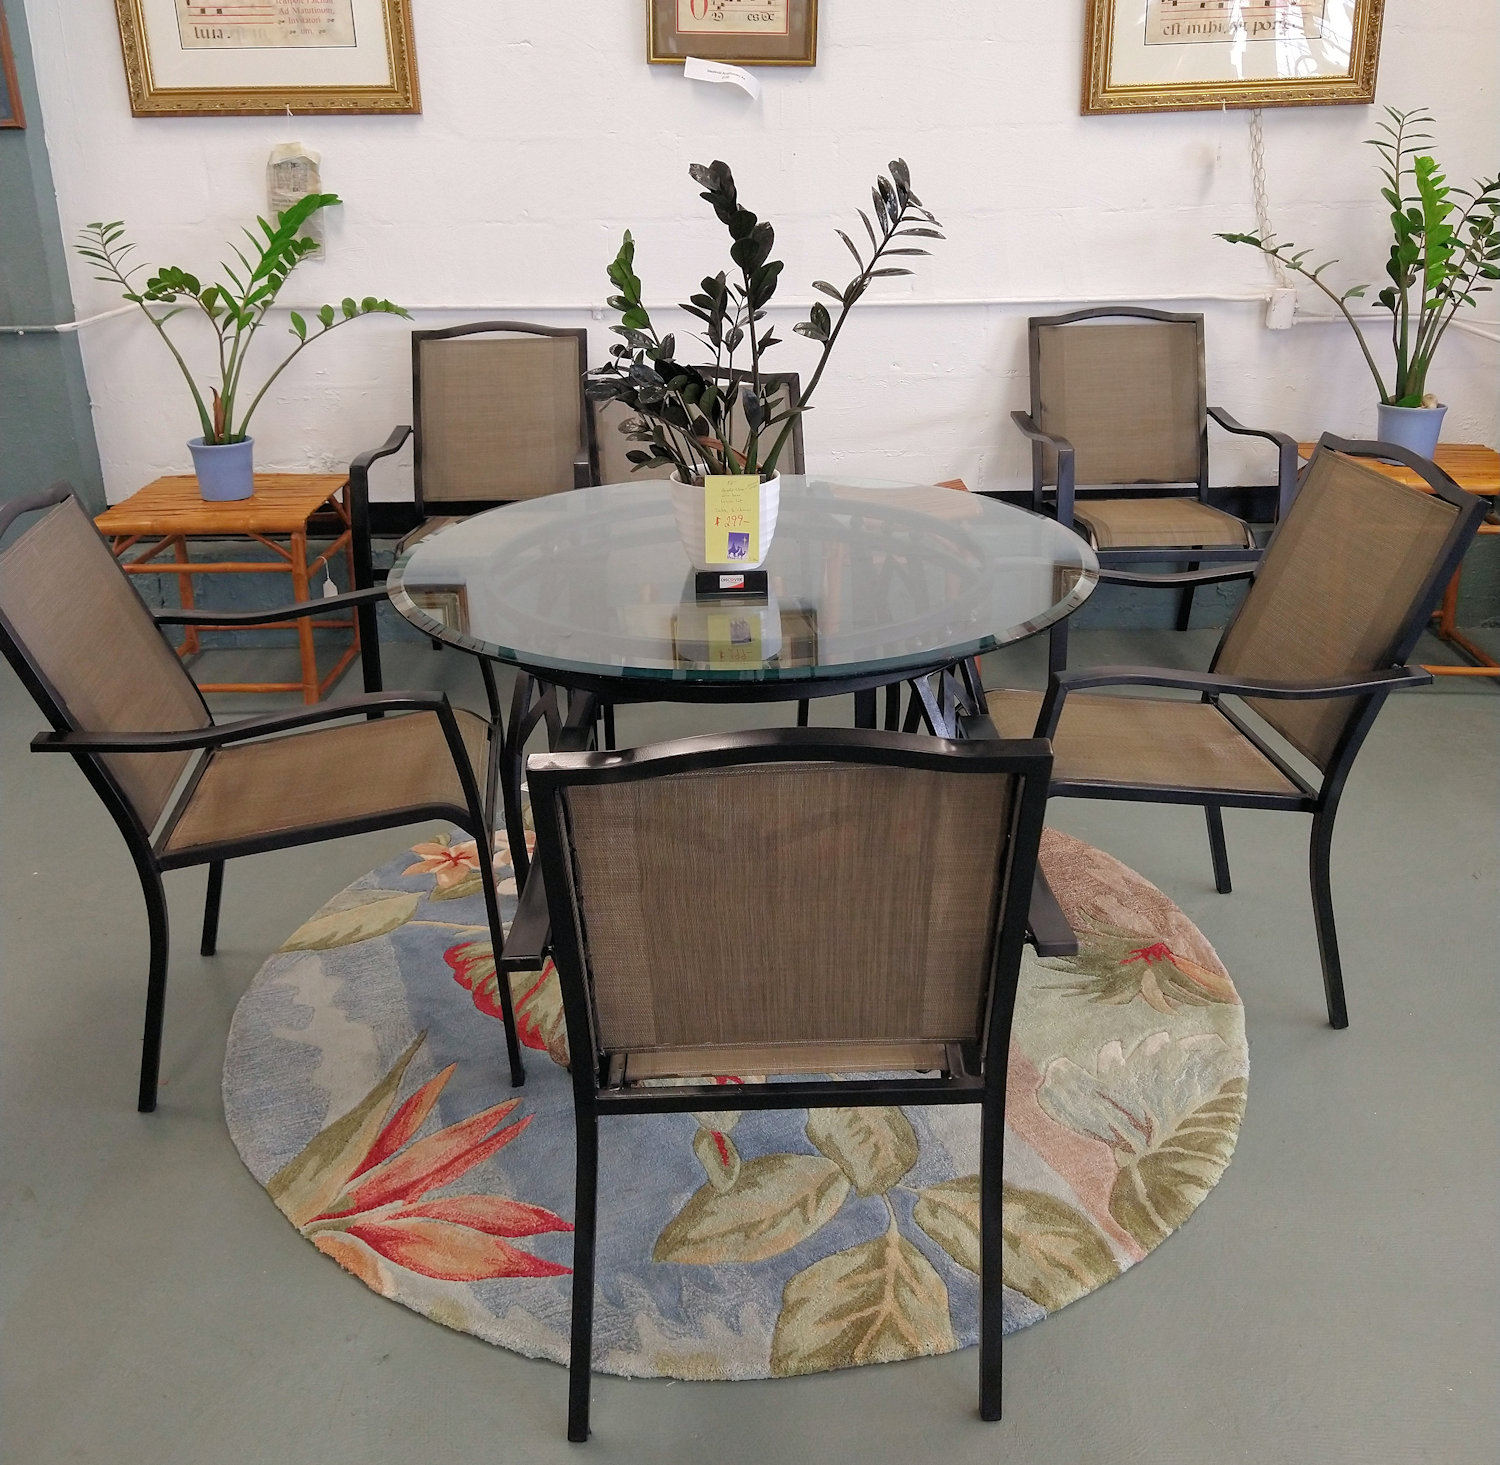 LA0105-glass-top-iron-base-table-6-chairs